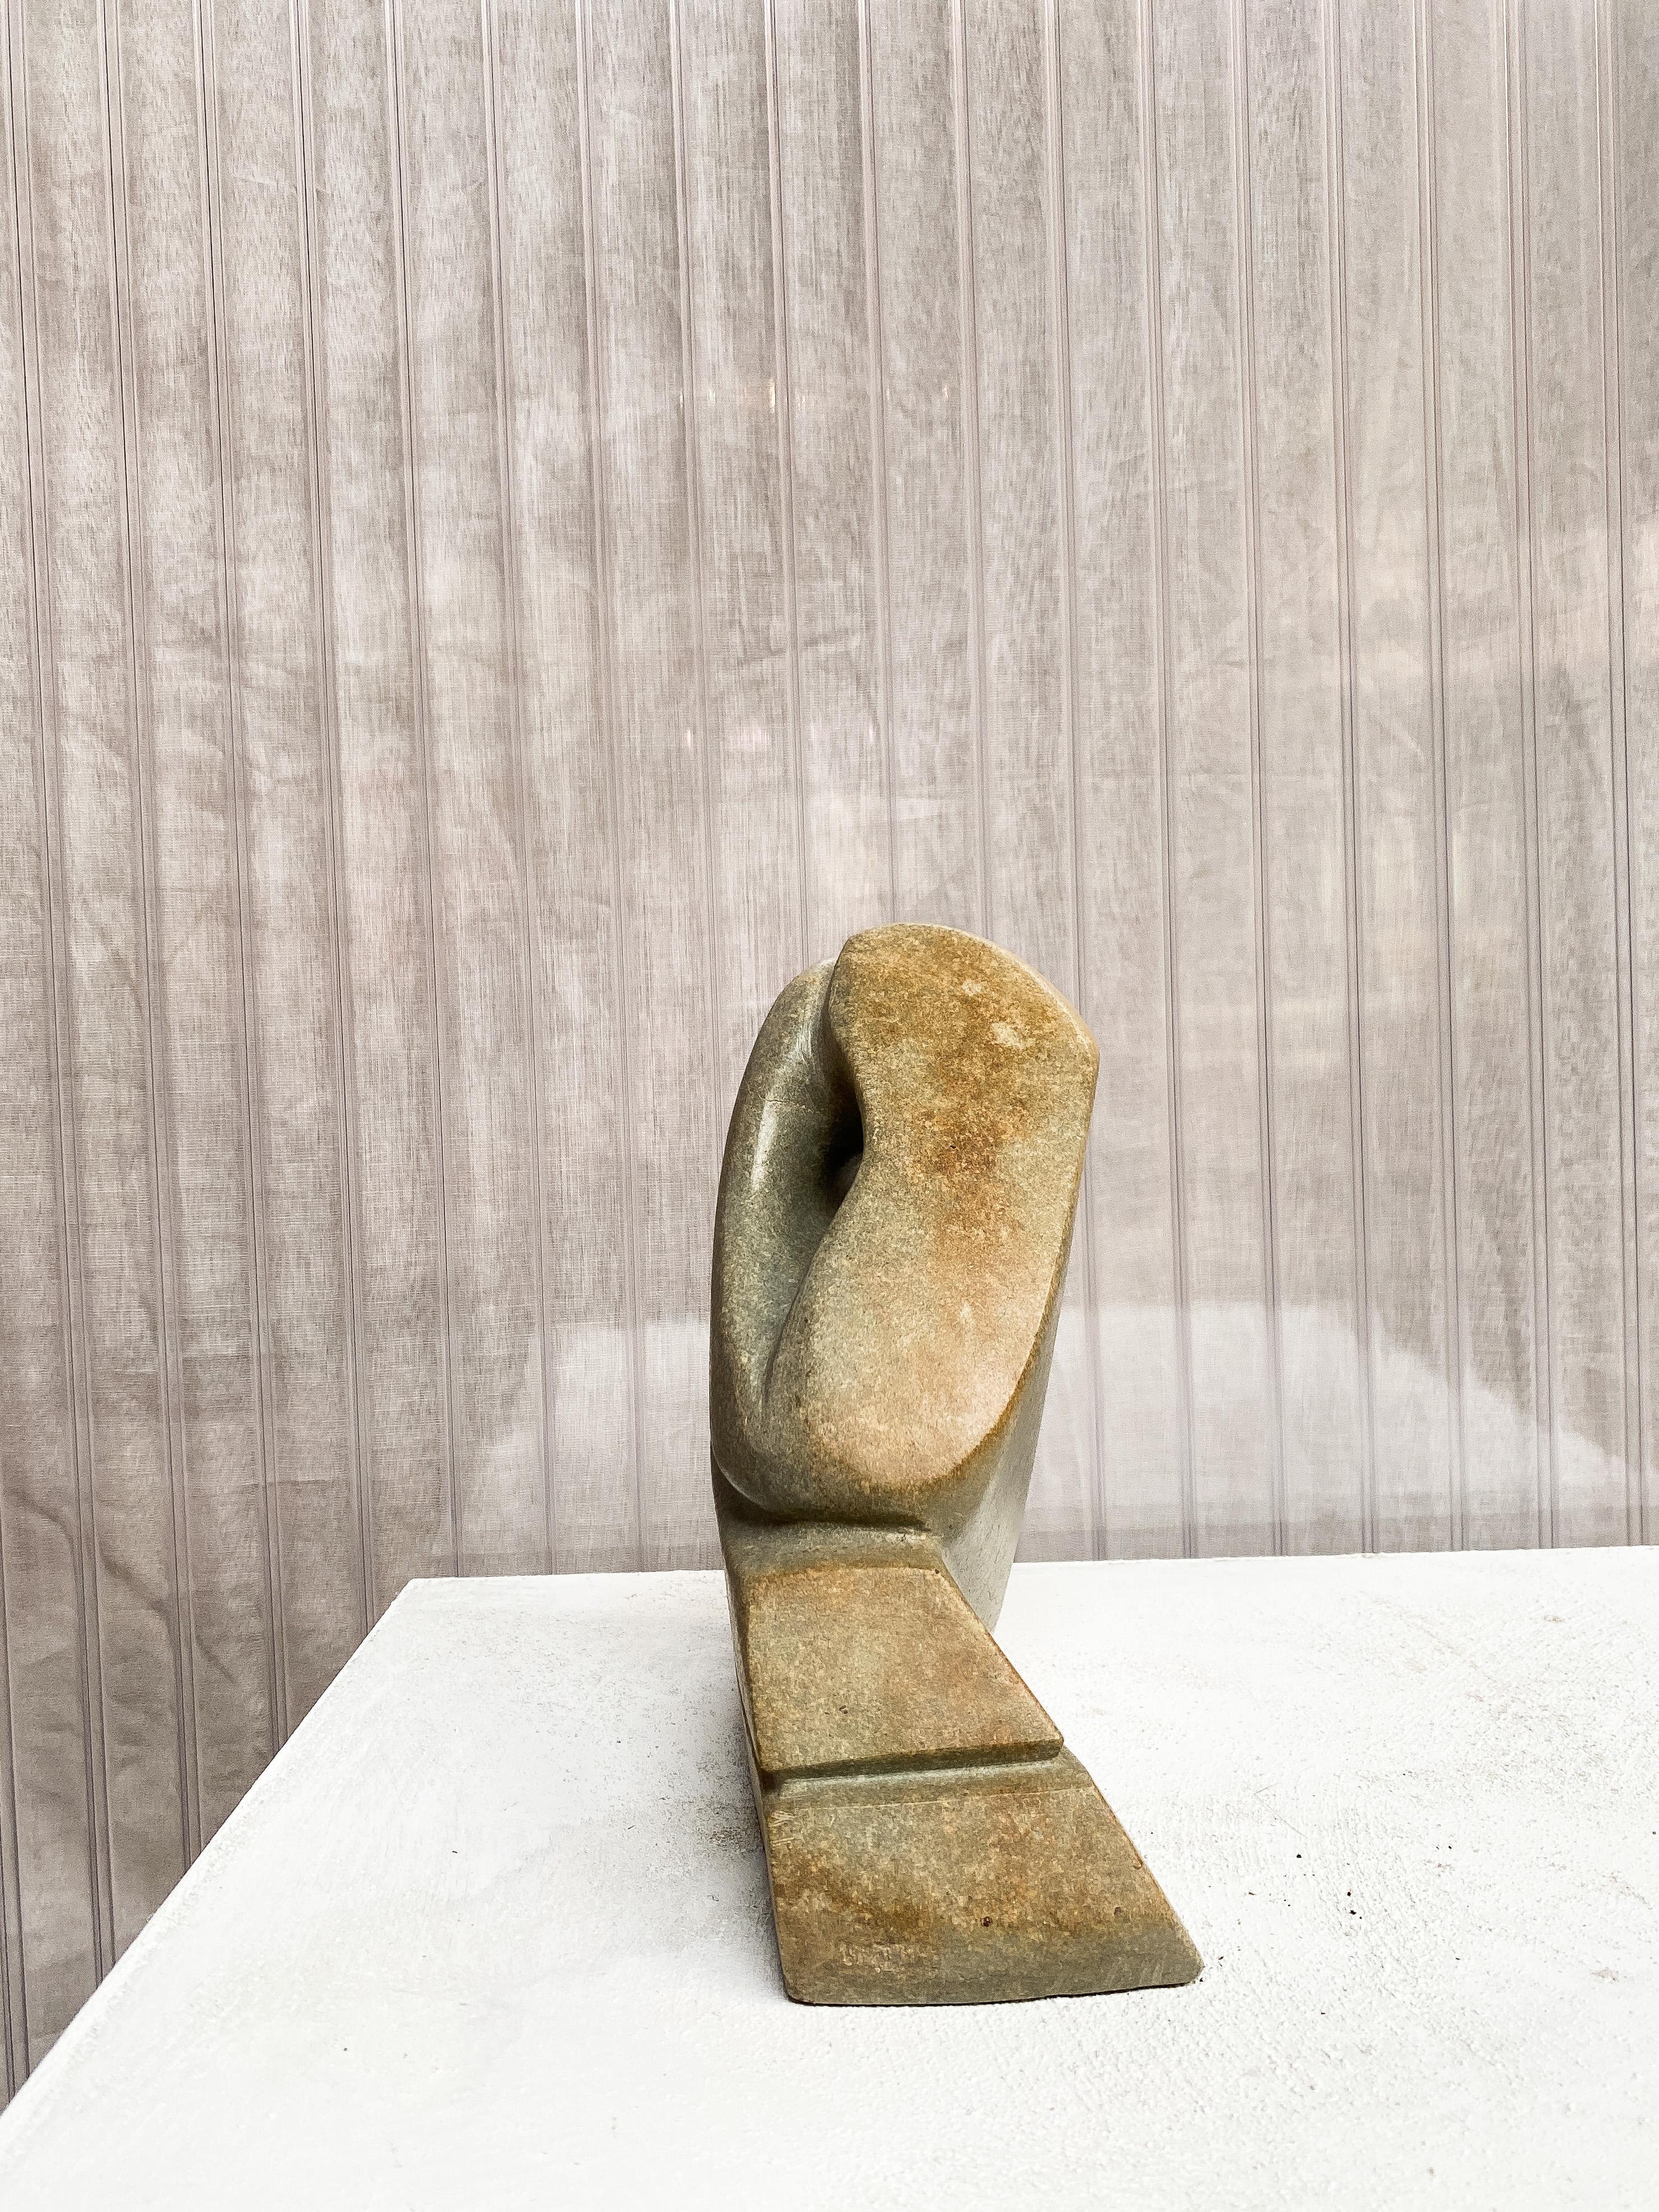 Organic shaped Abstract Mid-Century Sculpture in Greenish Stone, Hand Carved For Sale 1